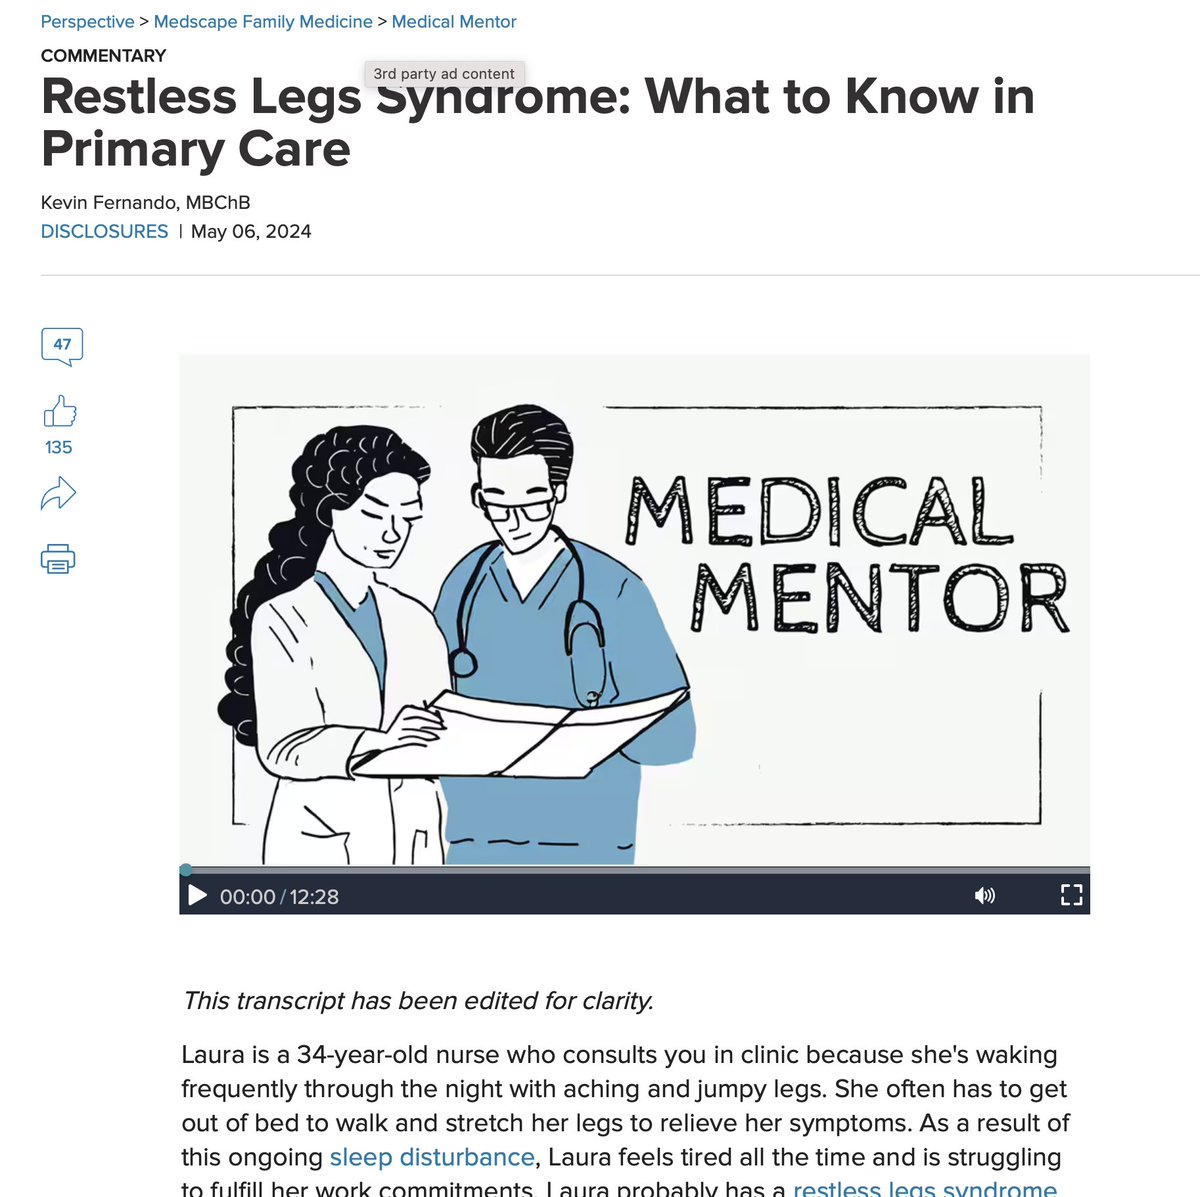 My latest @Medscape Medical Mentor podcast is live! 'Restless legs syndrome: what to know in primary care' Around 1 in 4 people with RLS have iron deficiency; how many of our patients living with RLS have ferritin levels checked? medscape.com/viewarticle/10… & also @Spotify